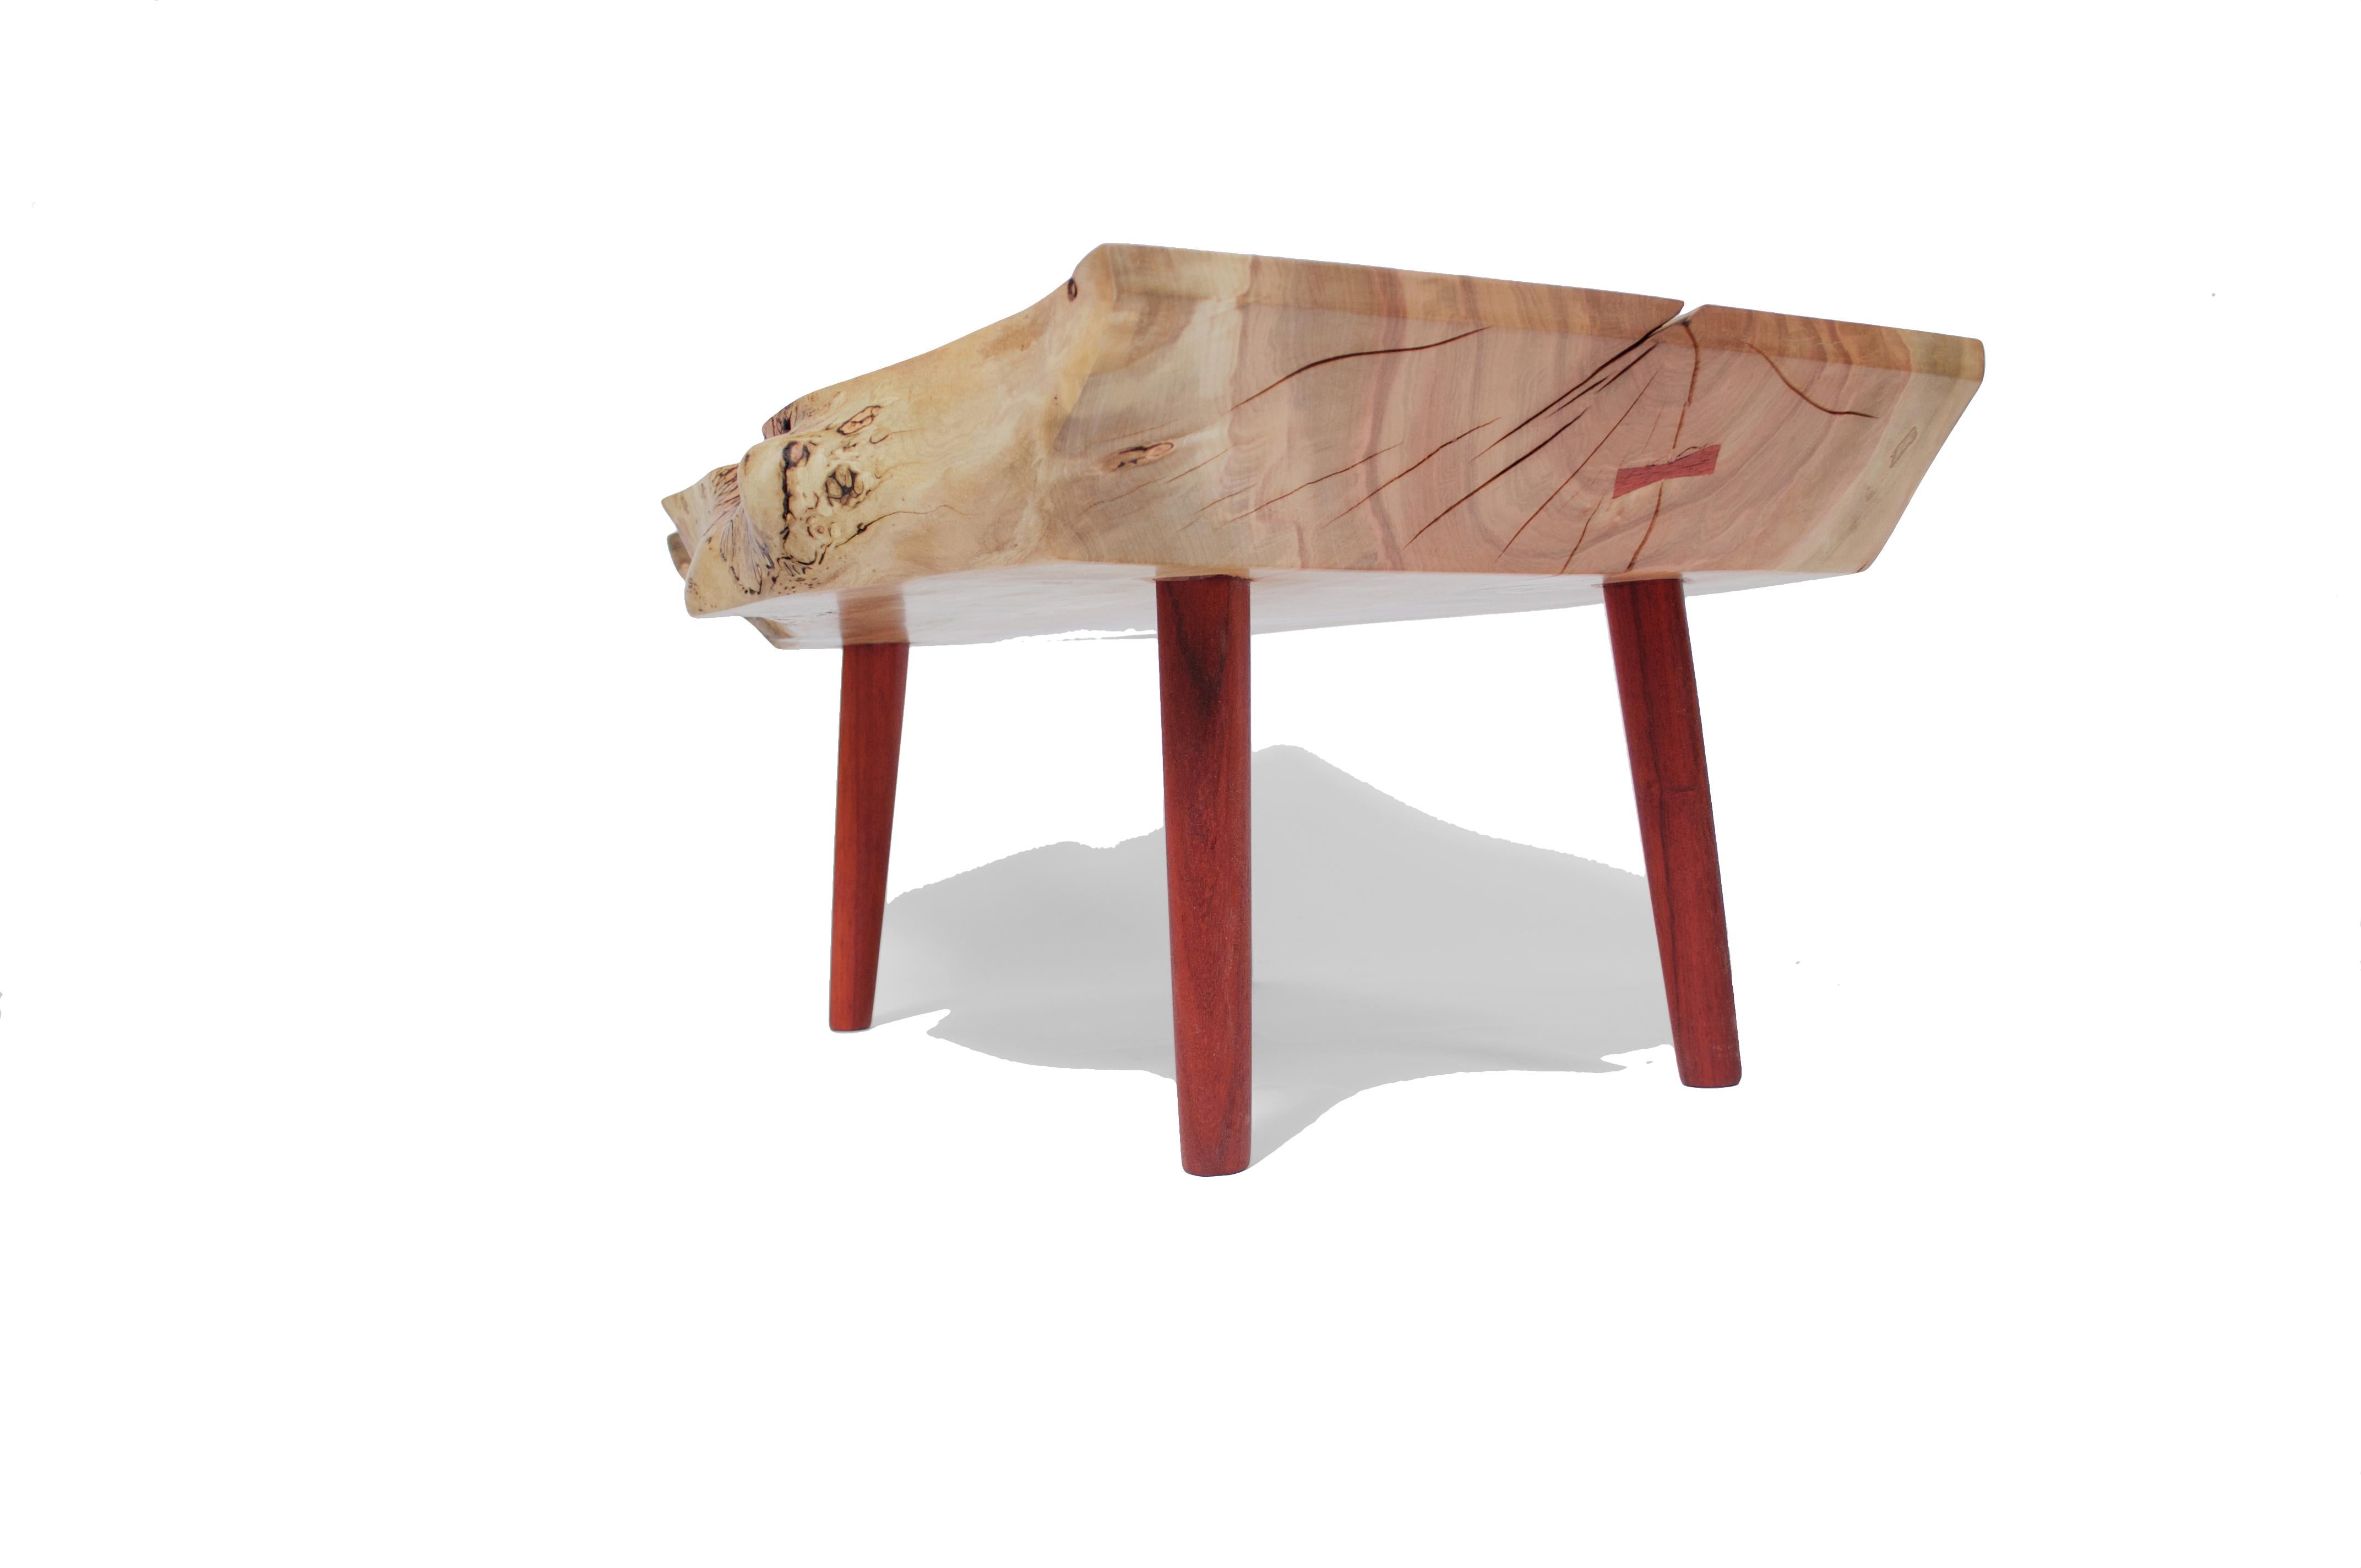 Unique signed table by Jörg Pietschmann
Materials: Norway maple, Padouk
Measures: H 38 x W 84 x D 61 cm

In Pietschmann’s sculptures, trees that for centuries were part of a landscape and founded in primordial forces tell stories inscribed in the